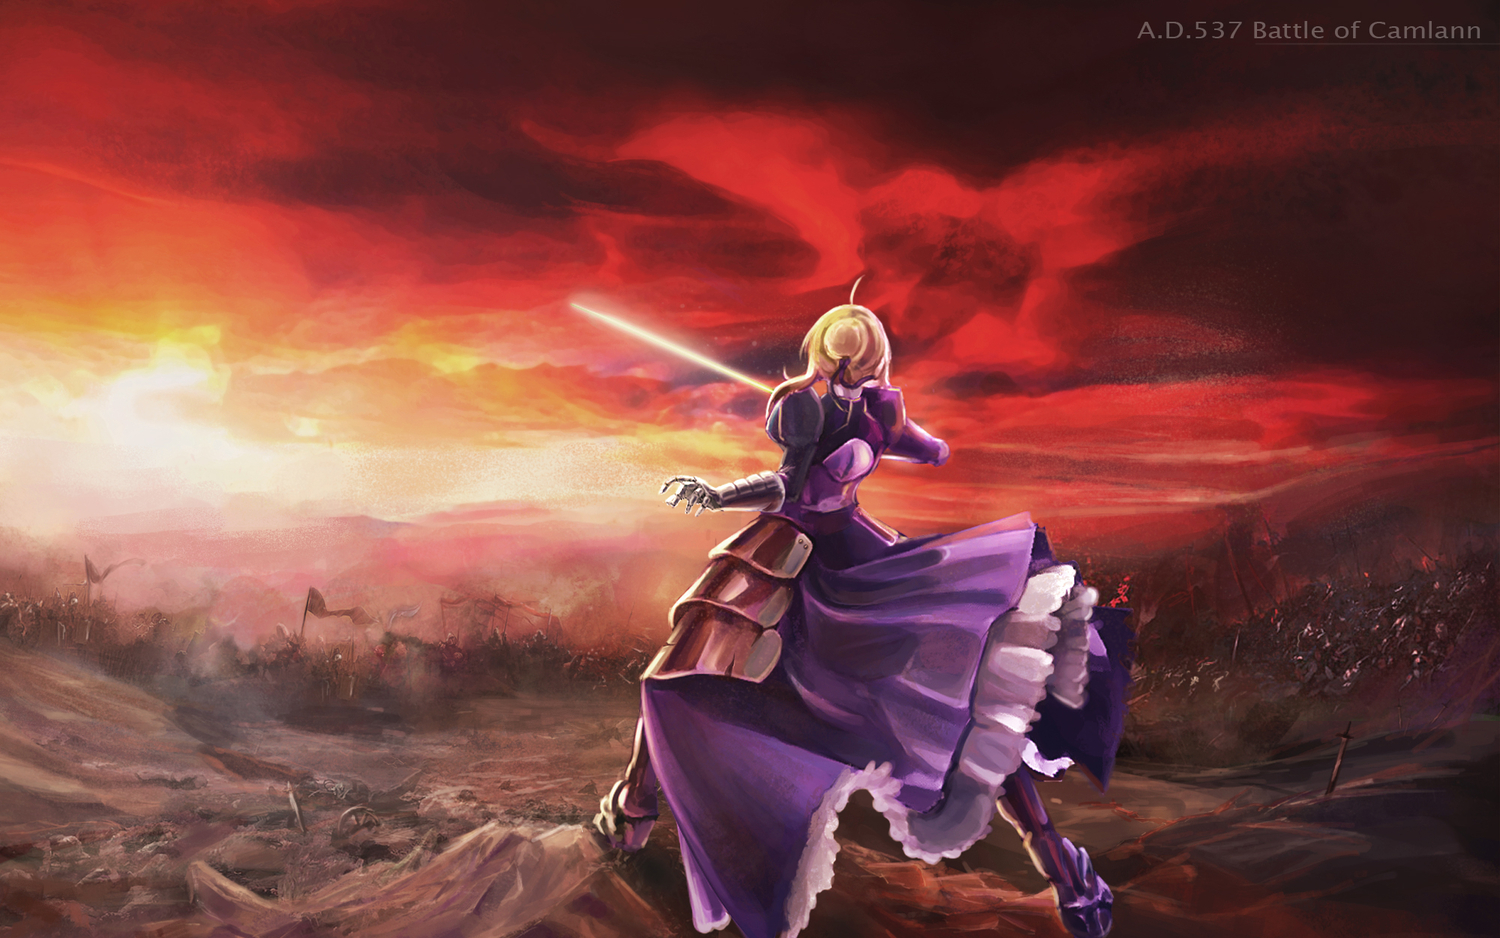 2. Saber from Fate/stay night - wide 10